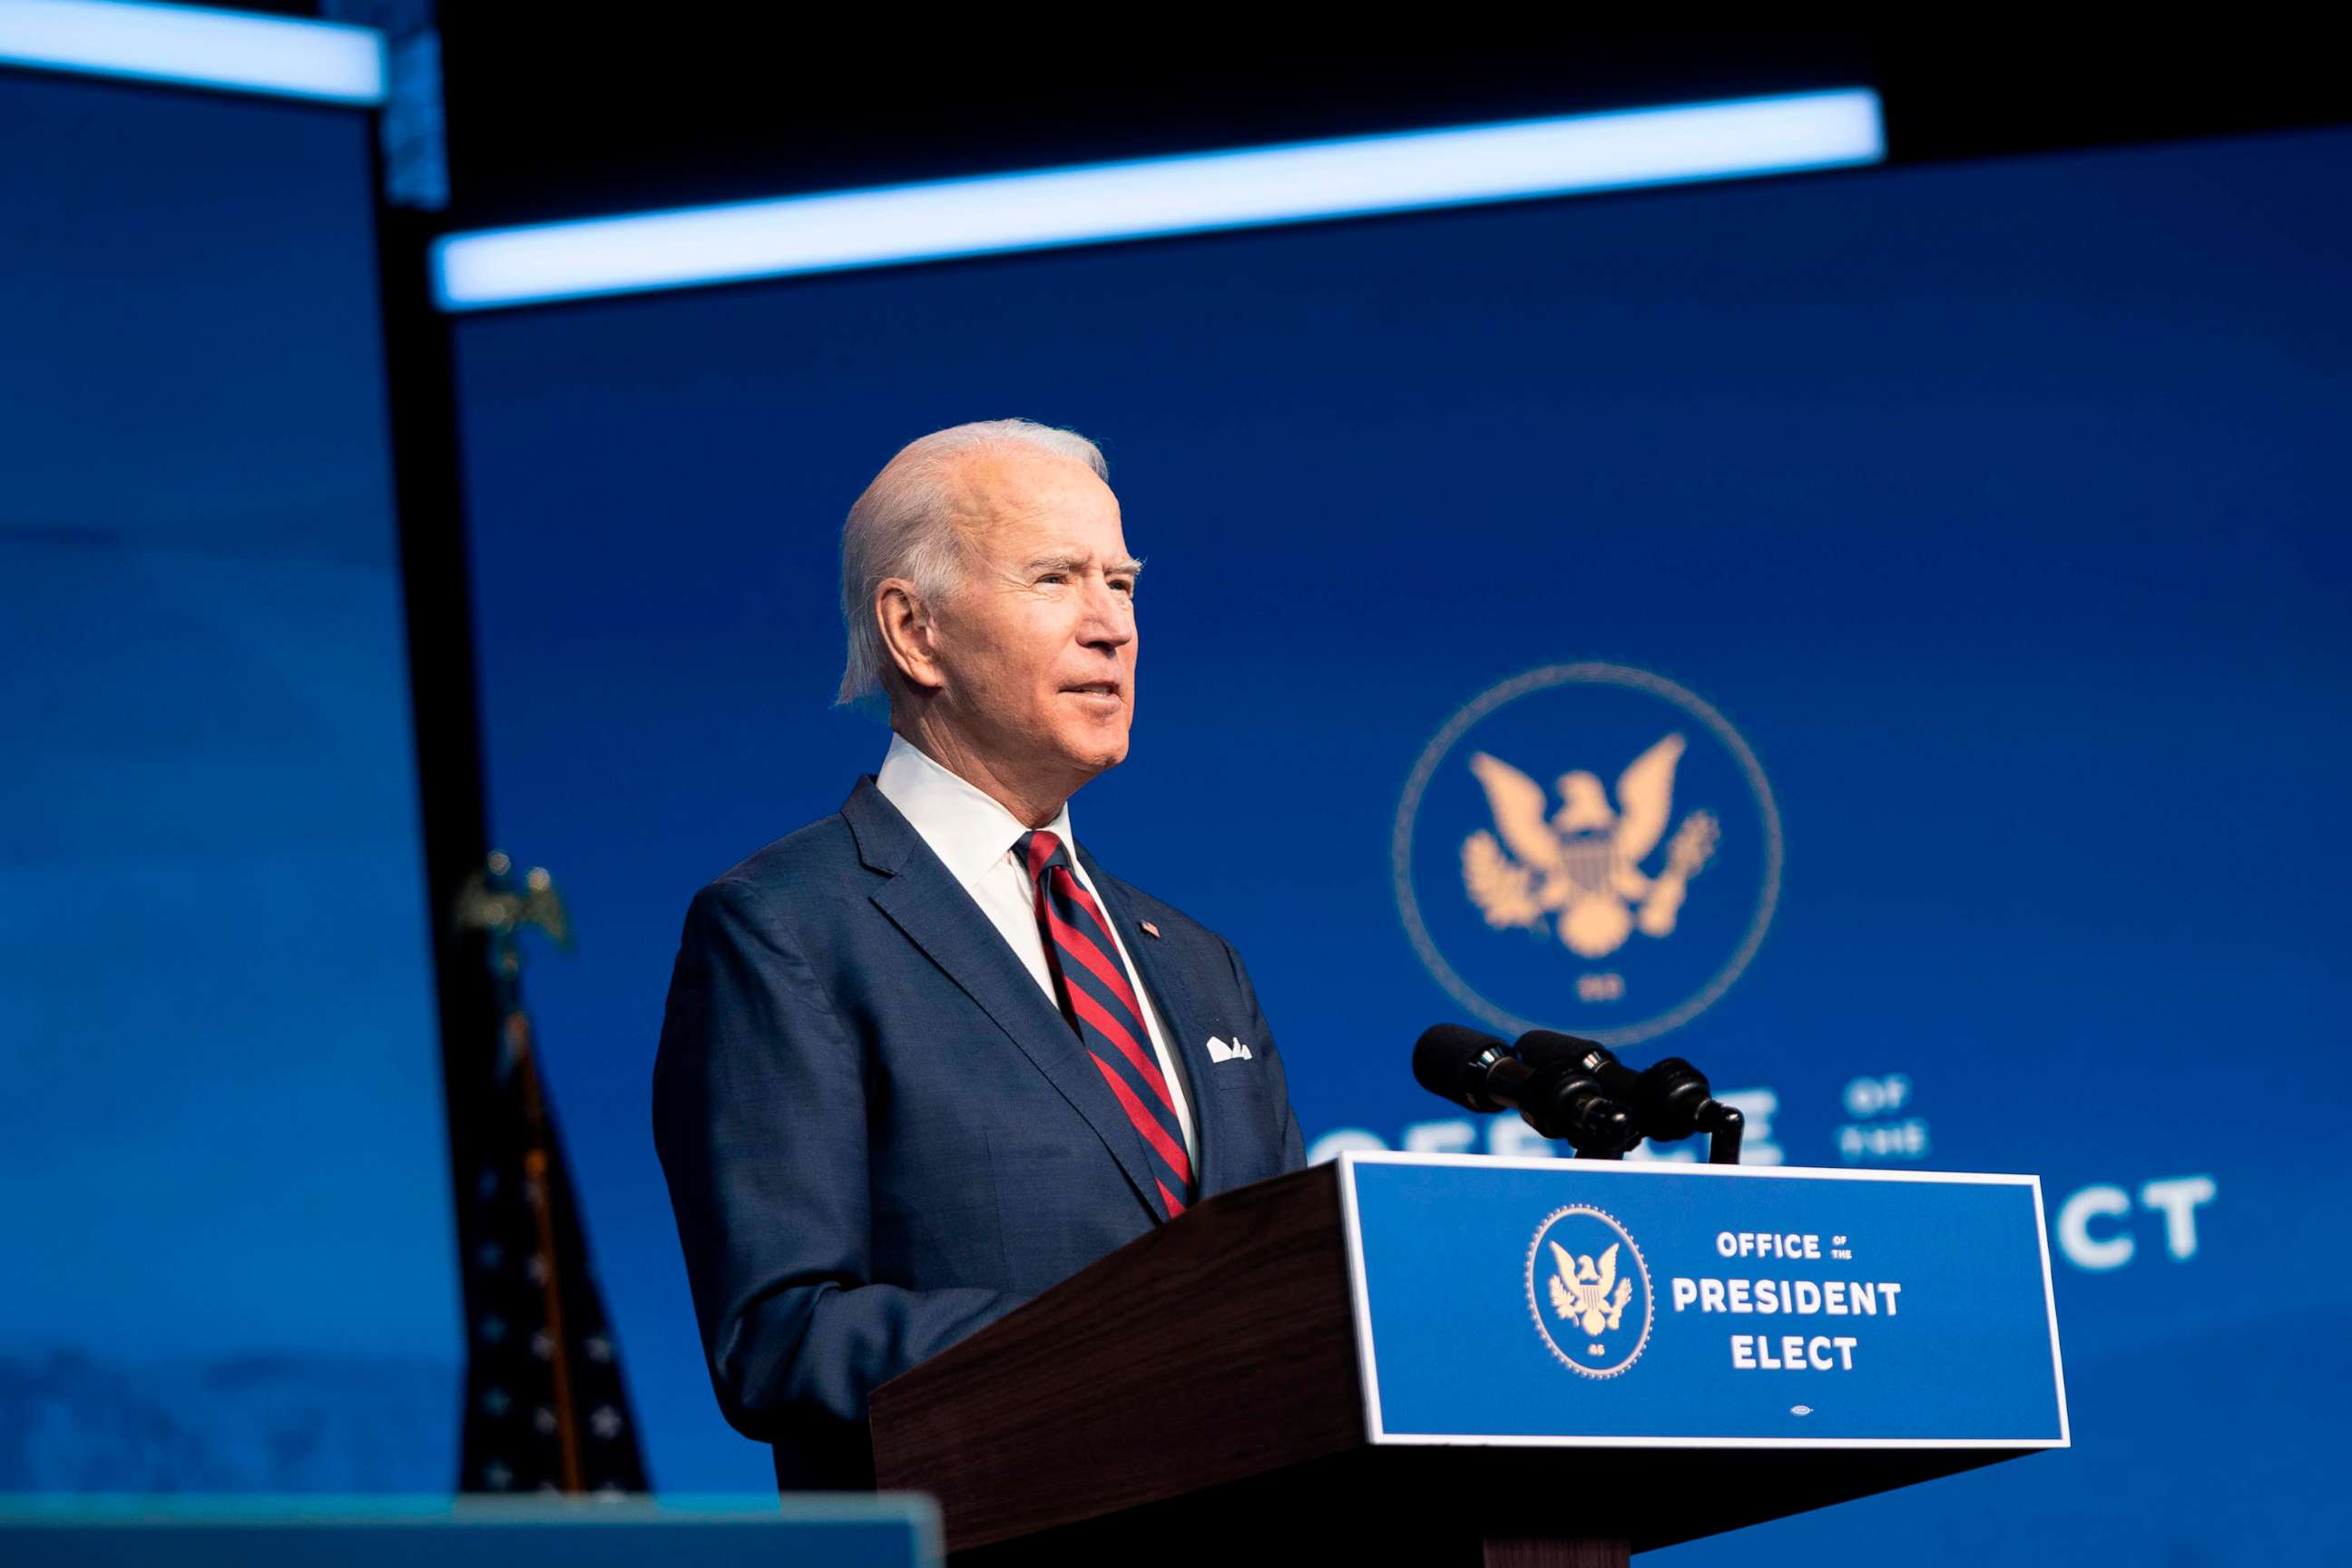 PHOTO: President-elect Joe Biden speaks during an event to introduce key Cabinet nominees and members of his climate team at The Queen Theater in Wilmington, Del. on Dec. 19, 2020.